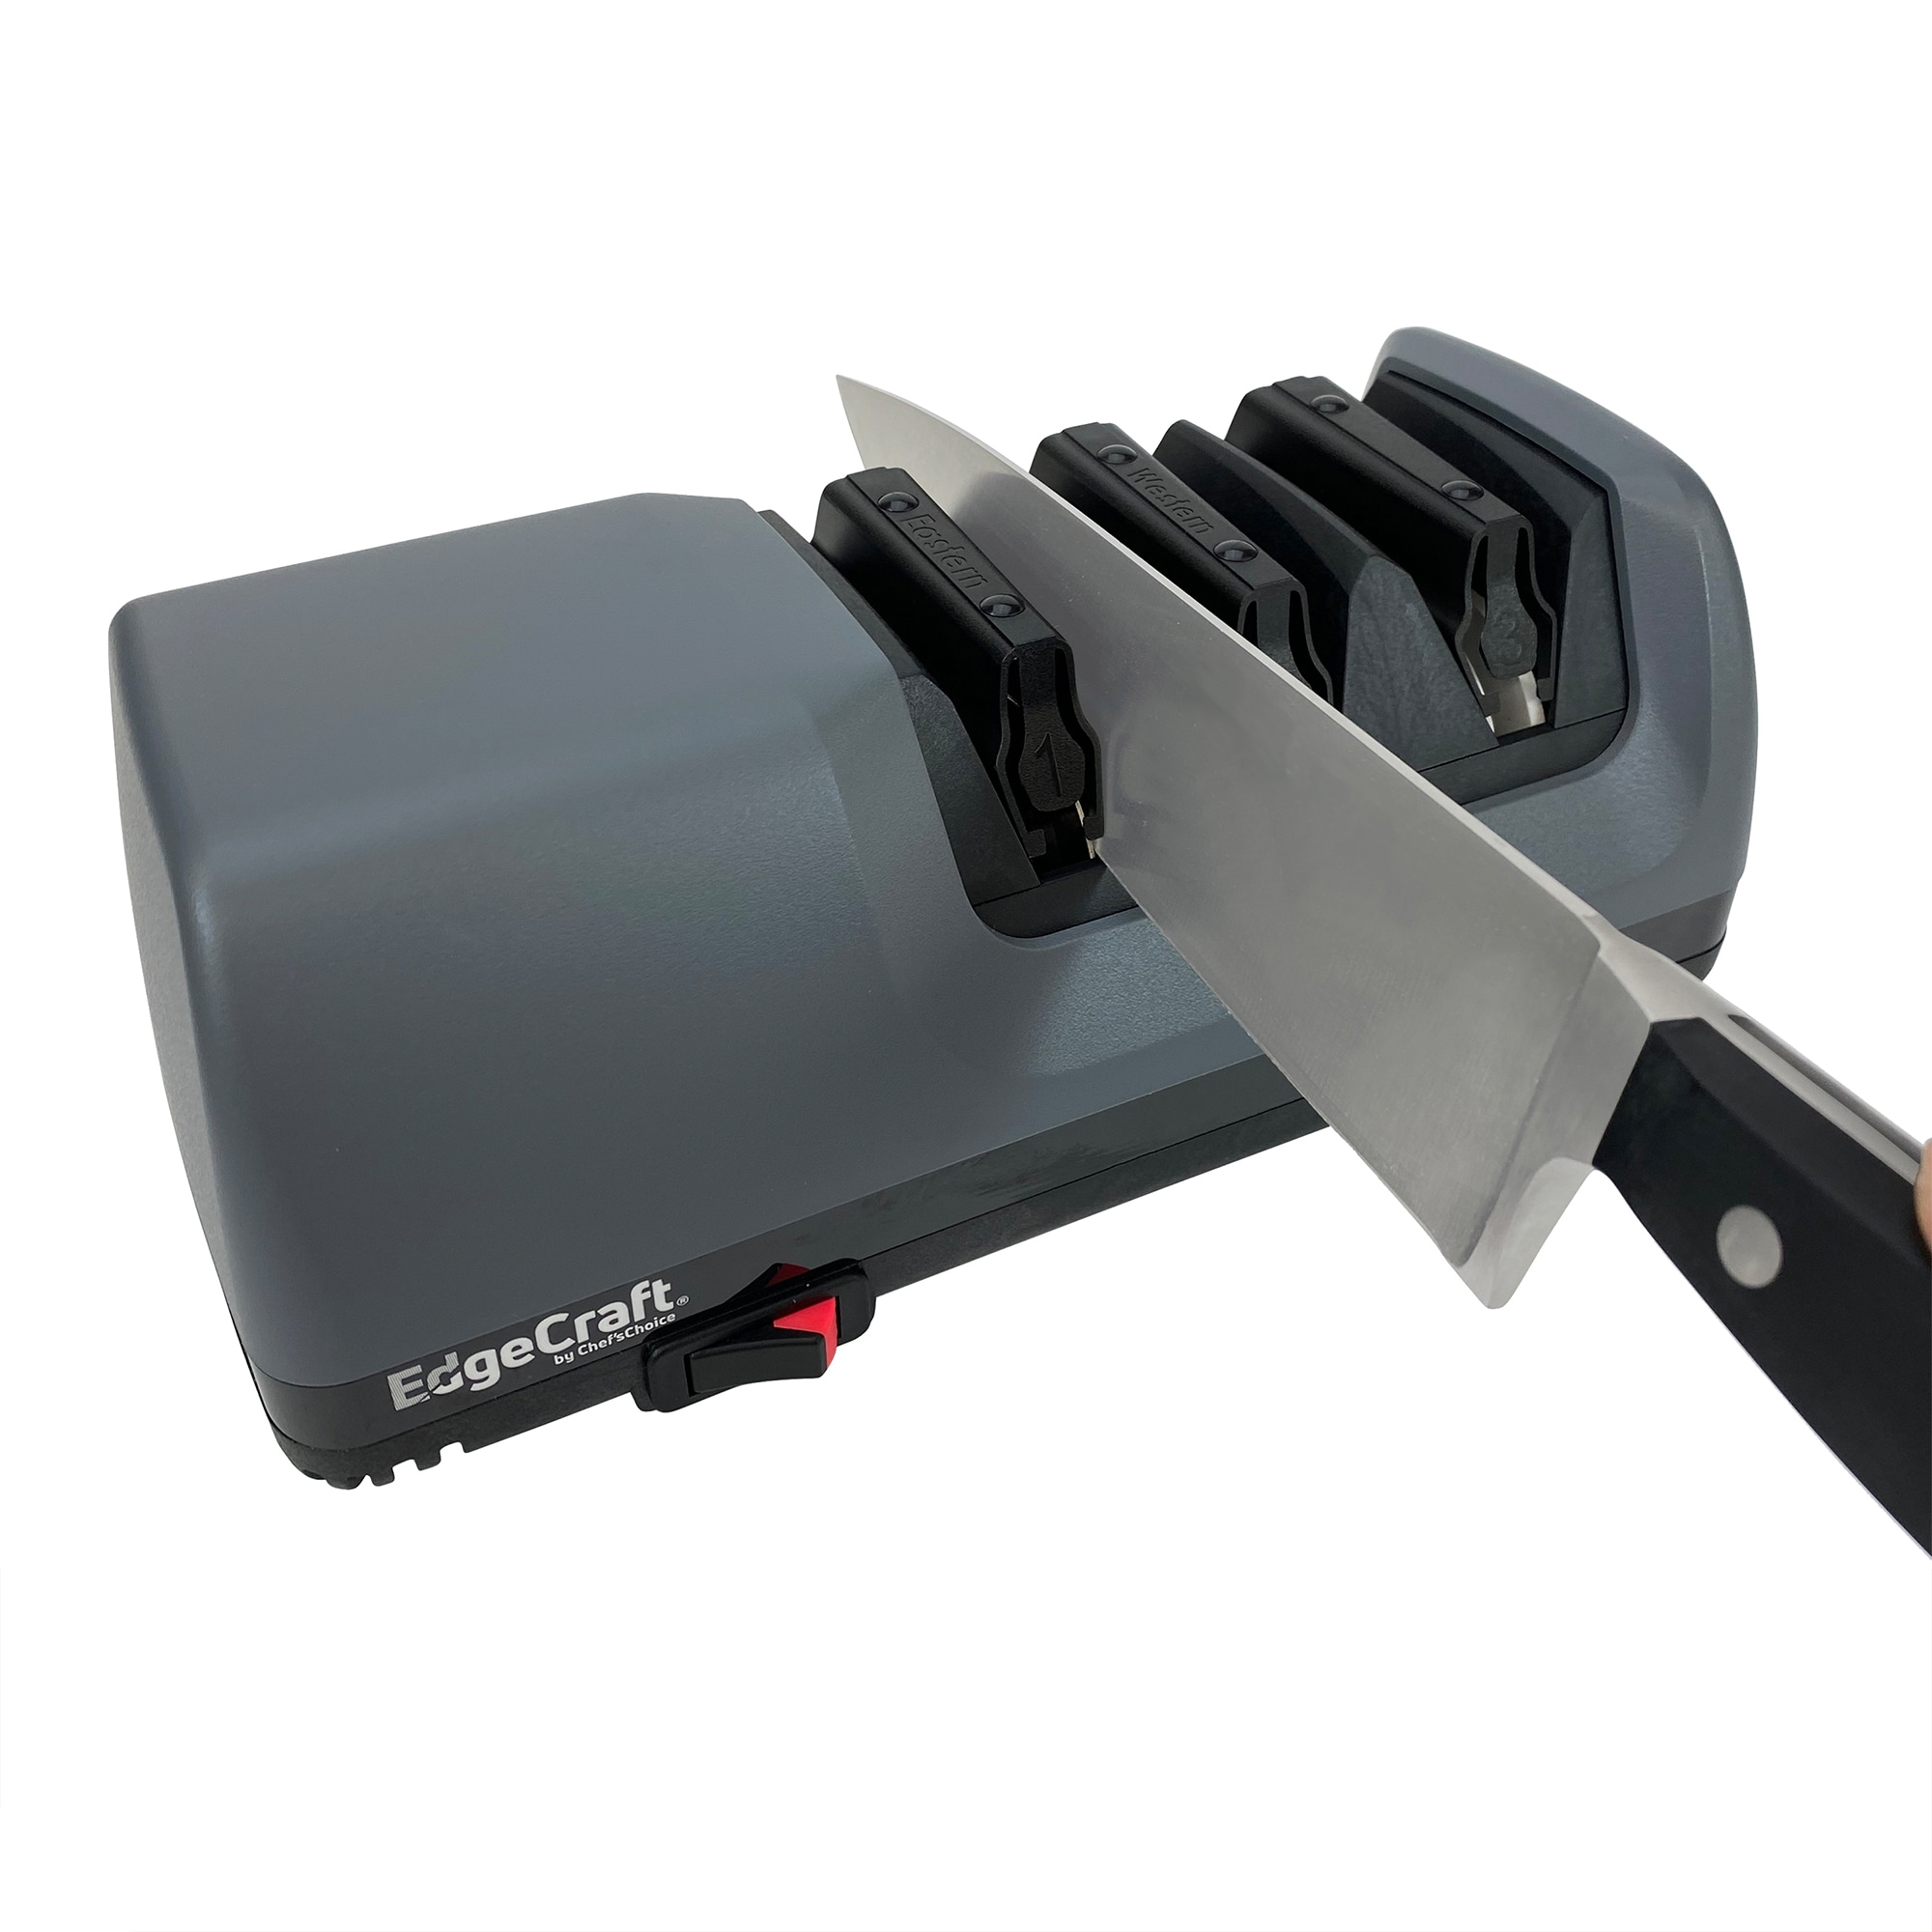 Chef's Choice 15XV Electric Knife Sharpener - Brushed Metal with Bonus  Knife – Cutlery and More